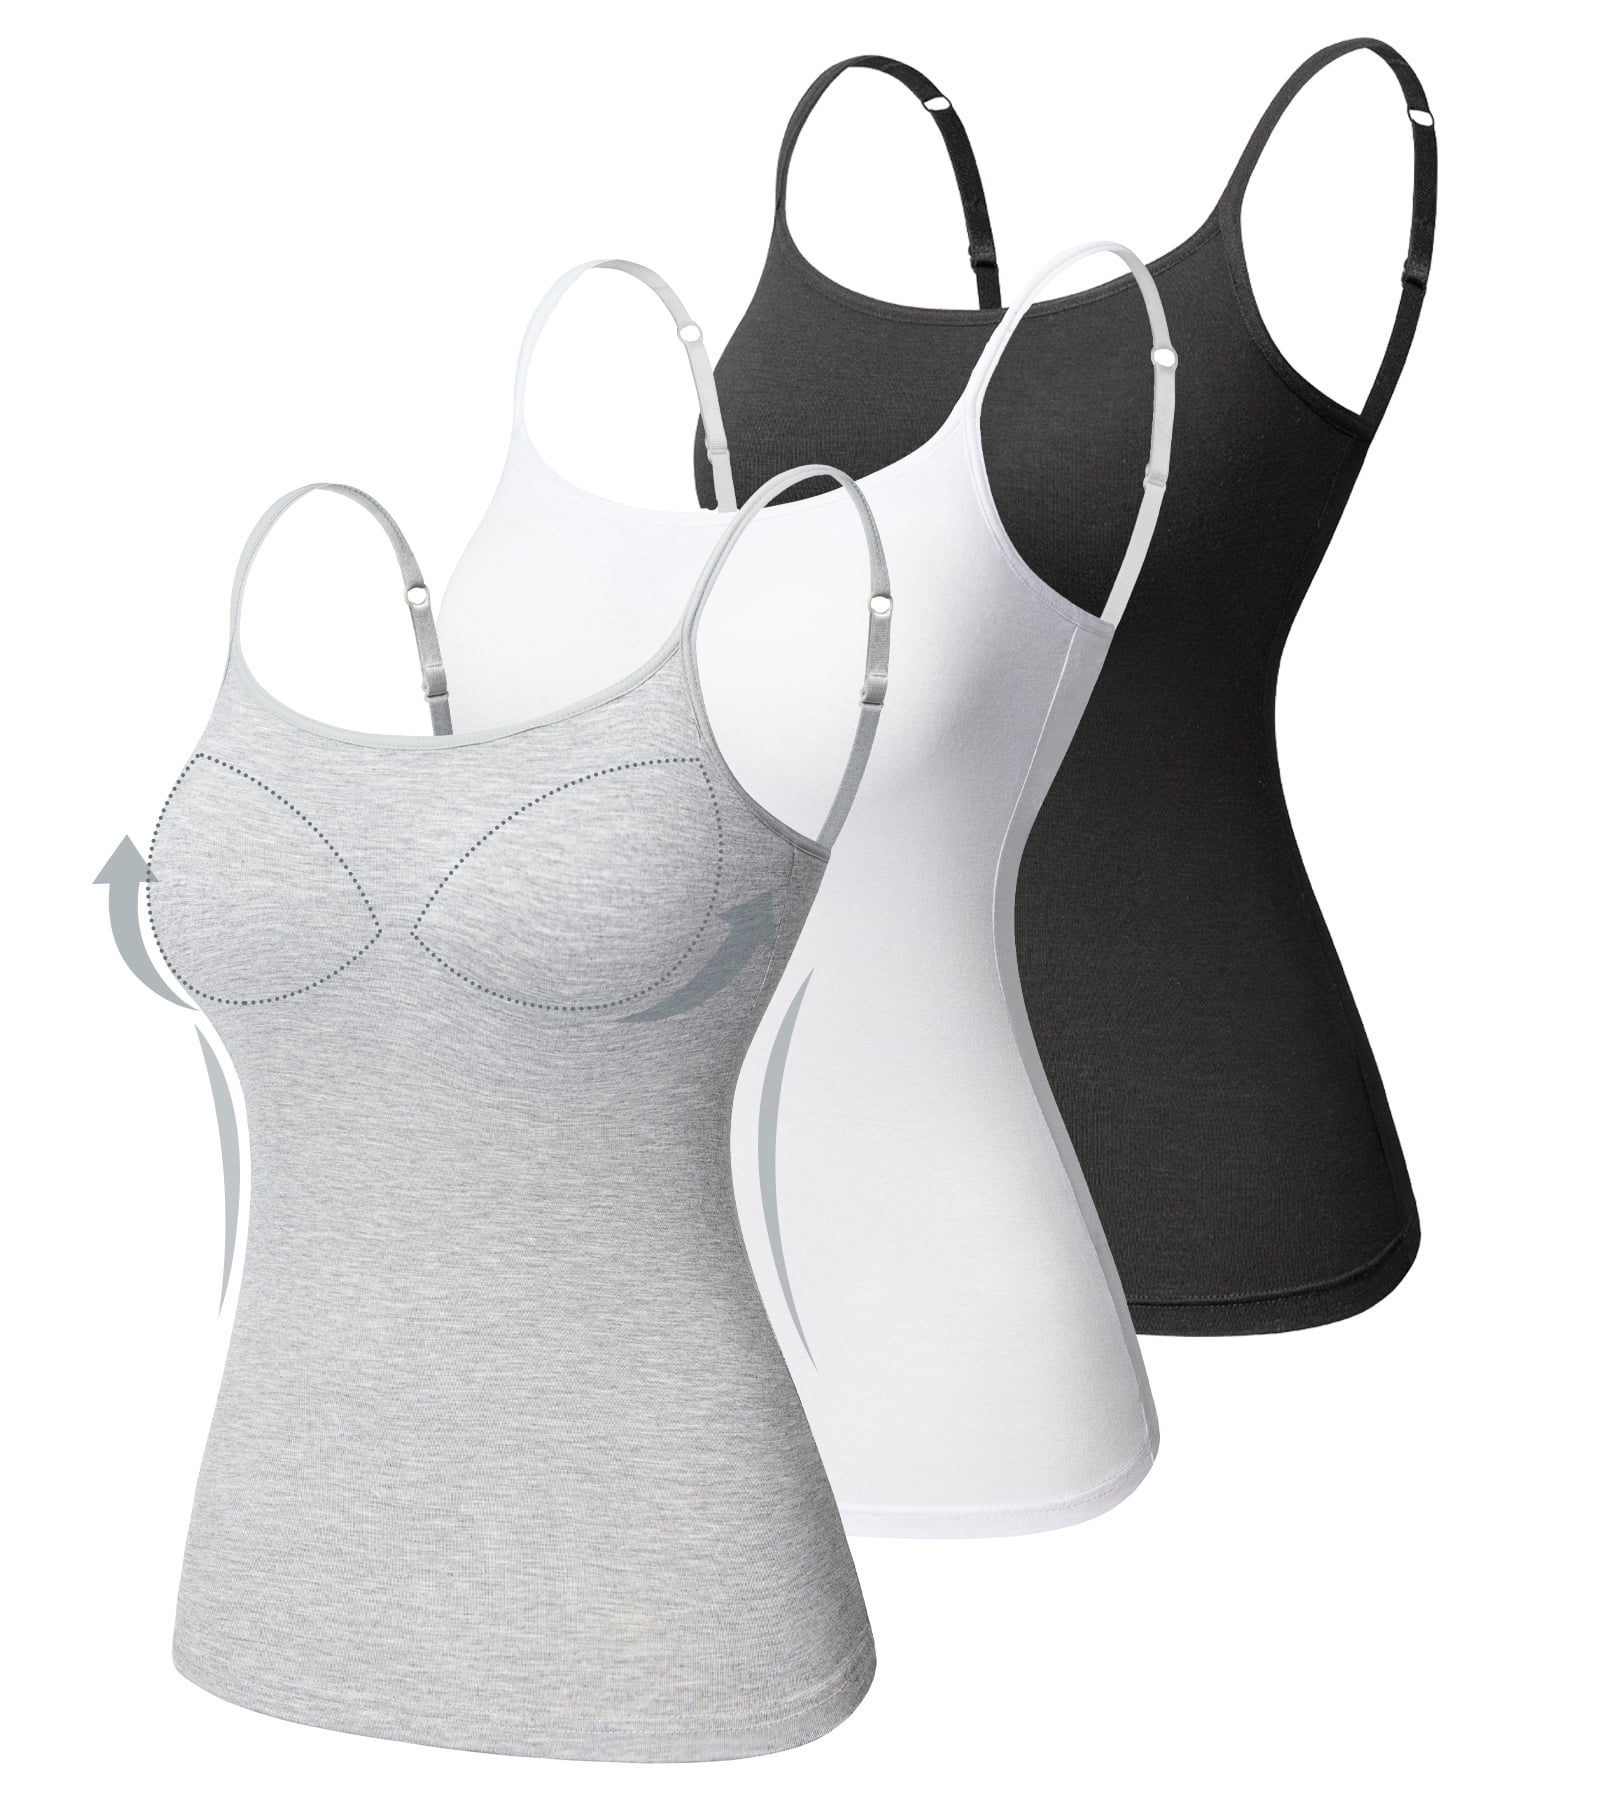 Qric - QRIC 3 Pack Women's Basic Solid Camisole Adjustable Spaghetti ...